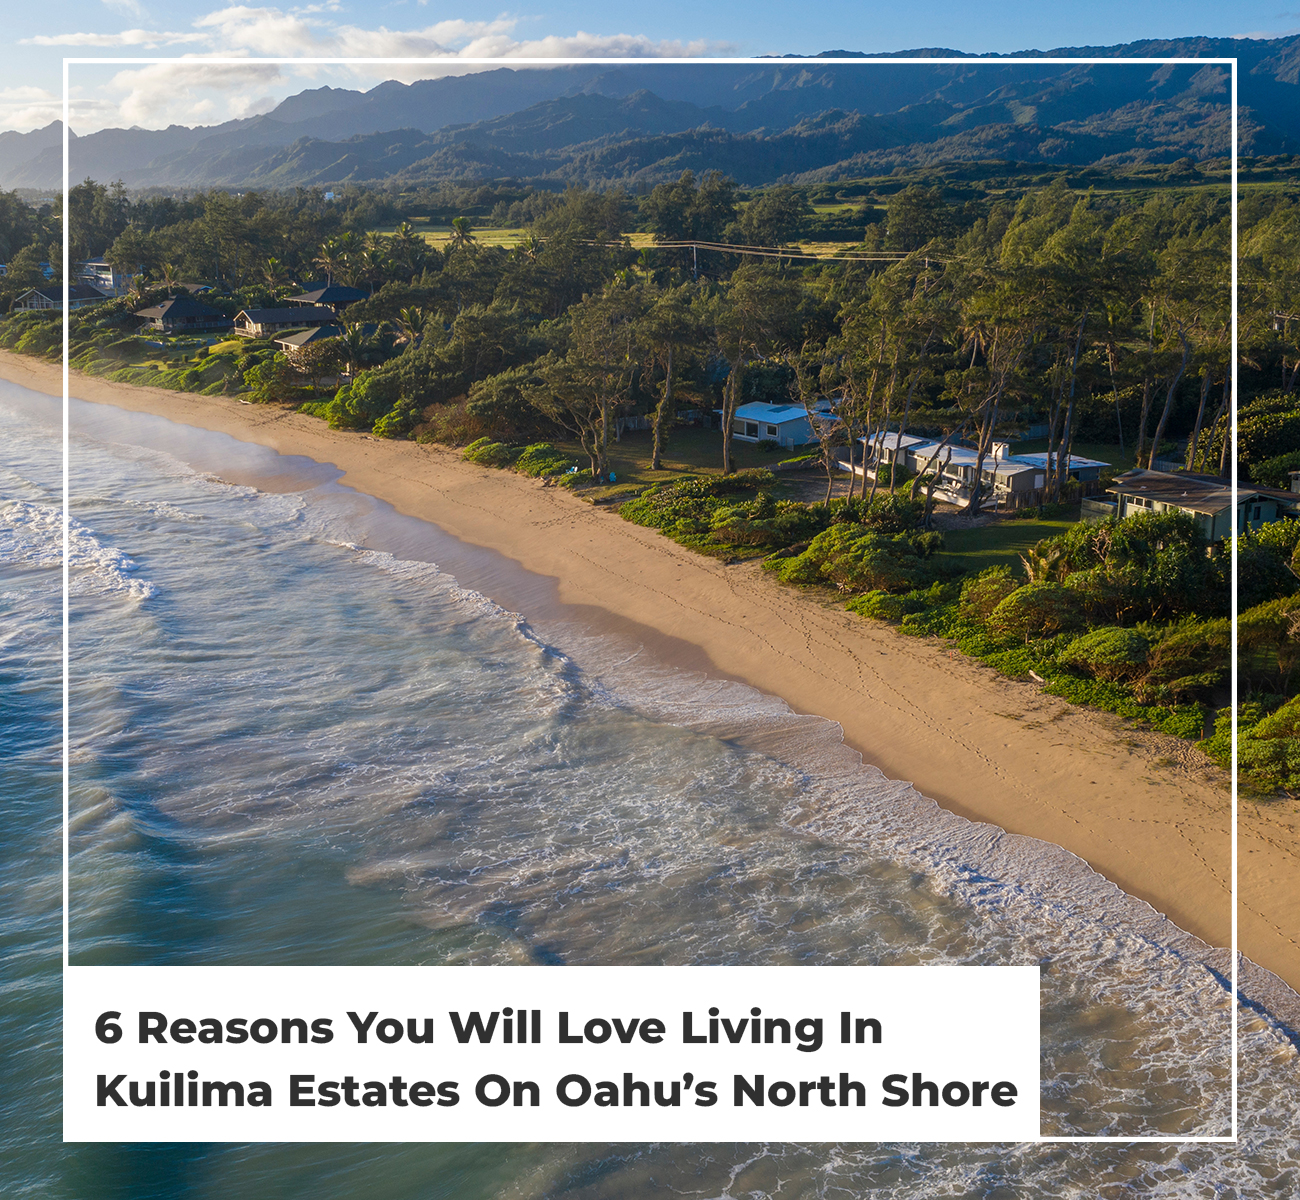 6 Reasons You Will Love Living In Kuilima Estates On Oahu's North Shore - Main Image